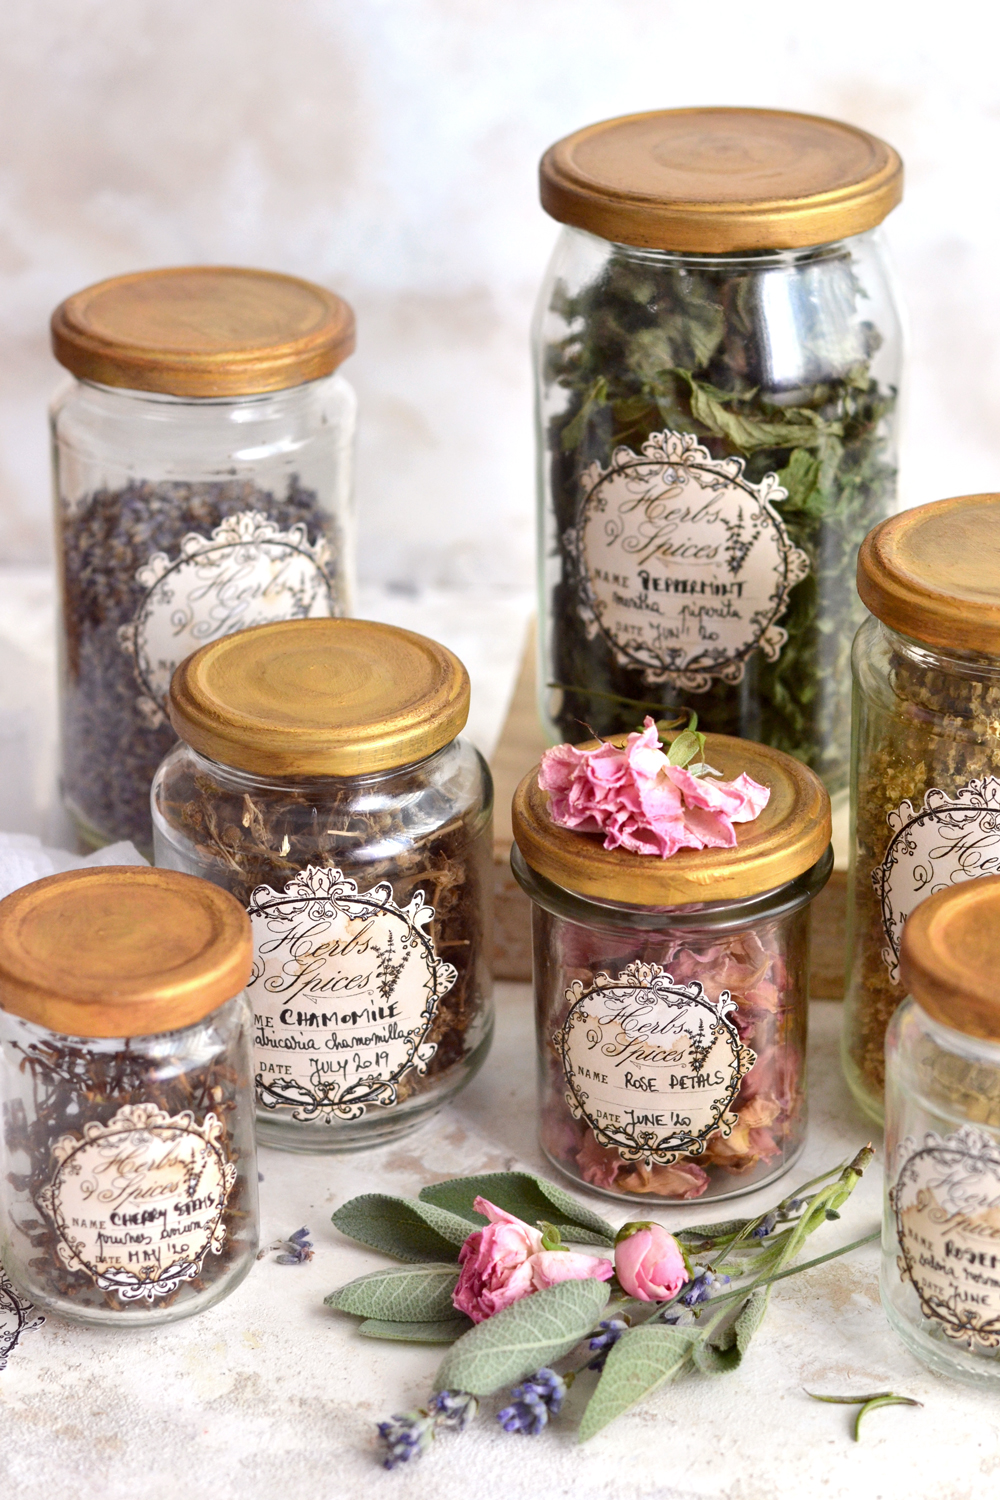 DIY Herbs and Spices Apothecary Jars